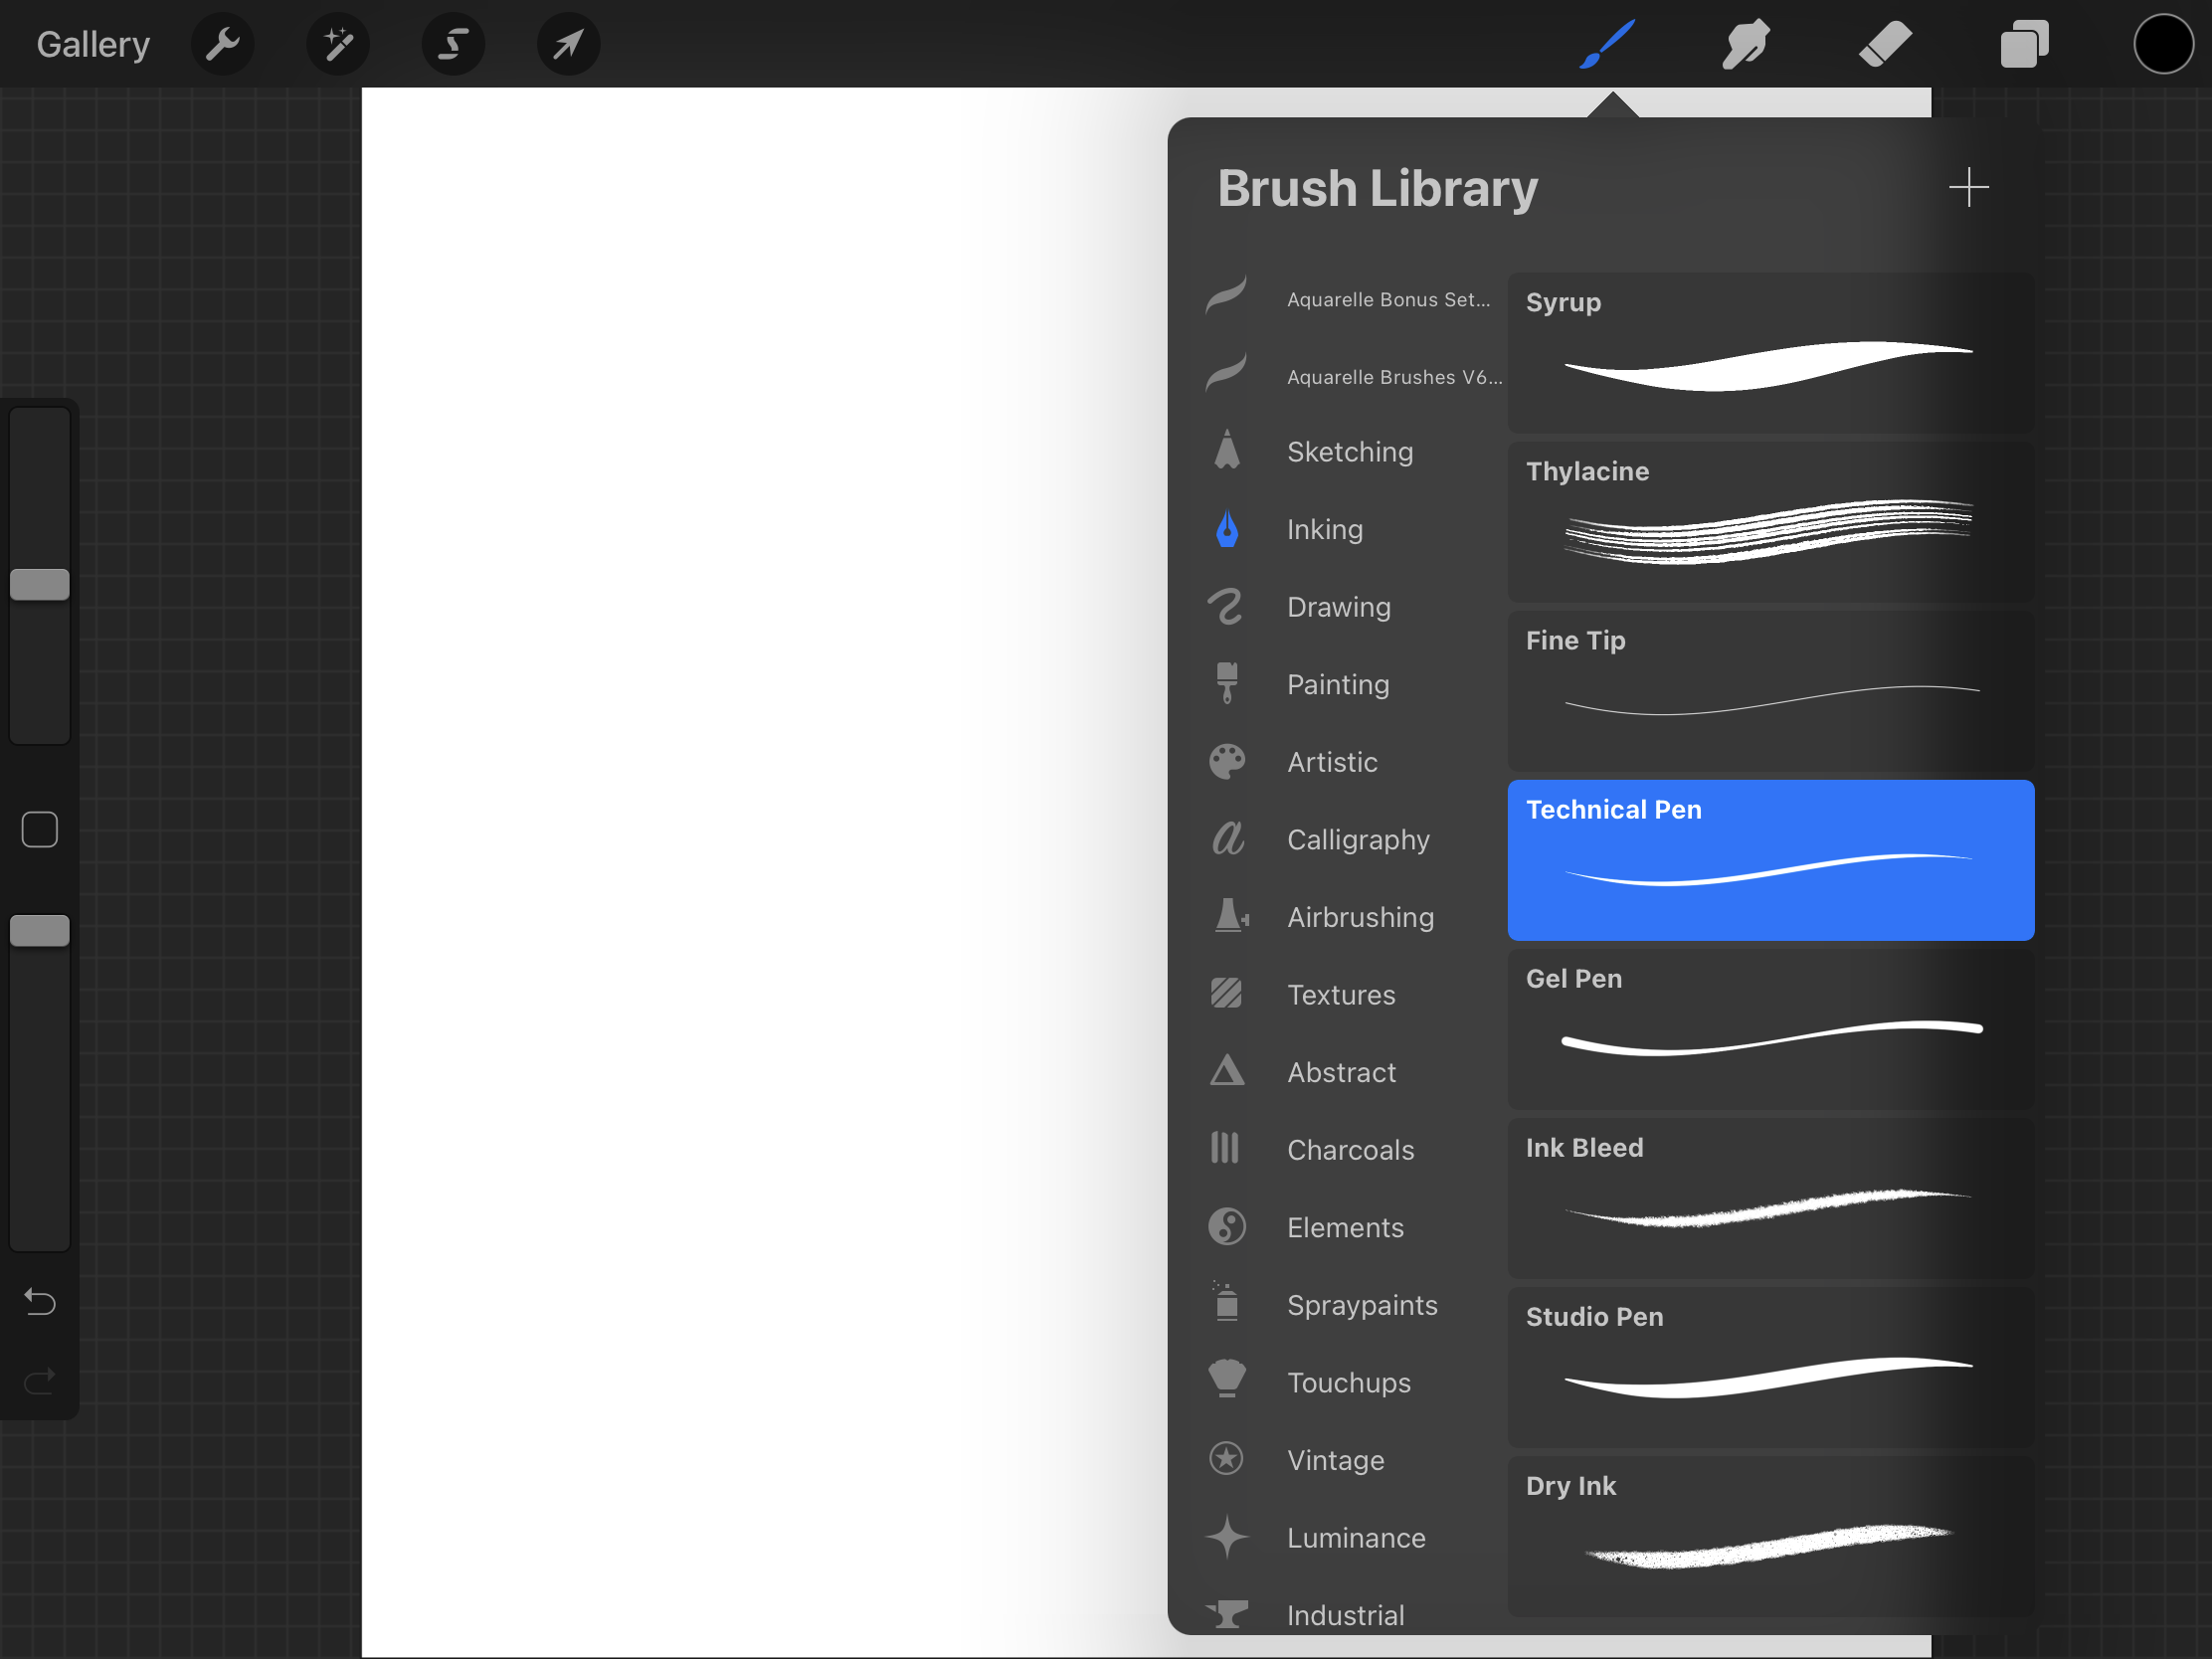 It shows various options of brushes under Brush Library.